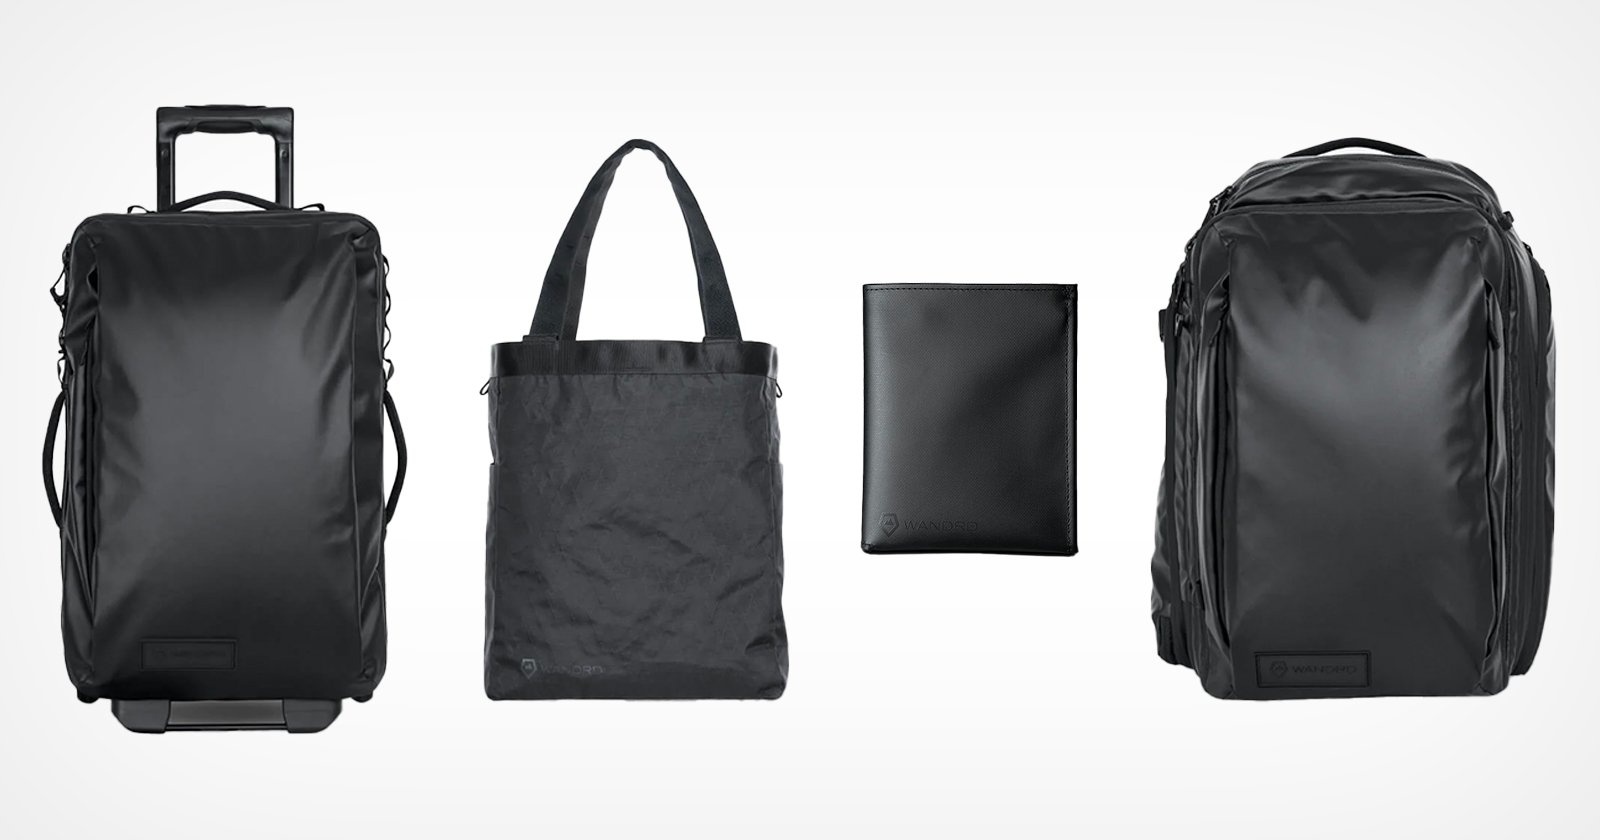  wandrd launches transit travel series bags 